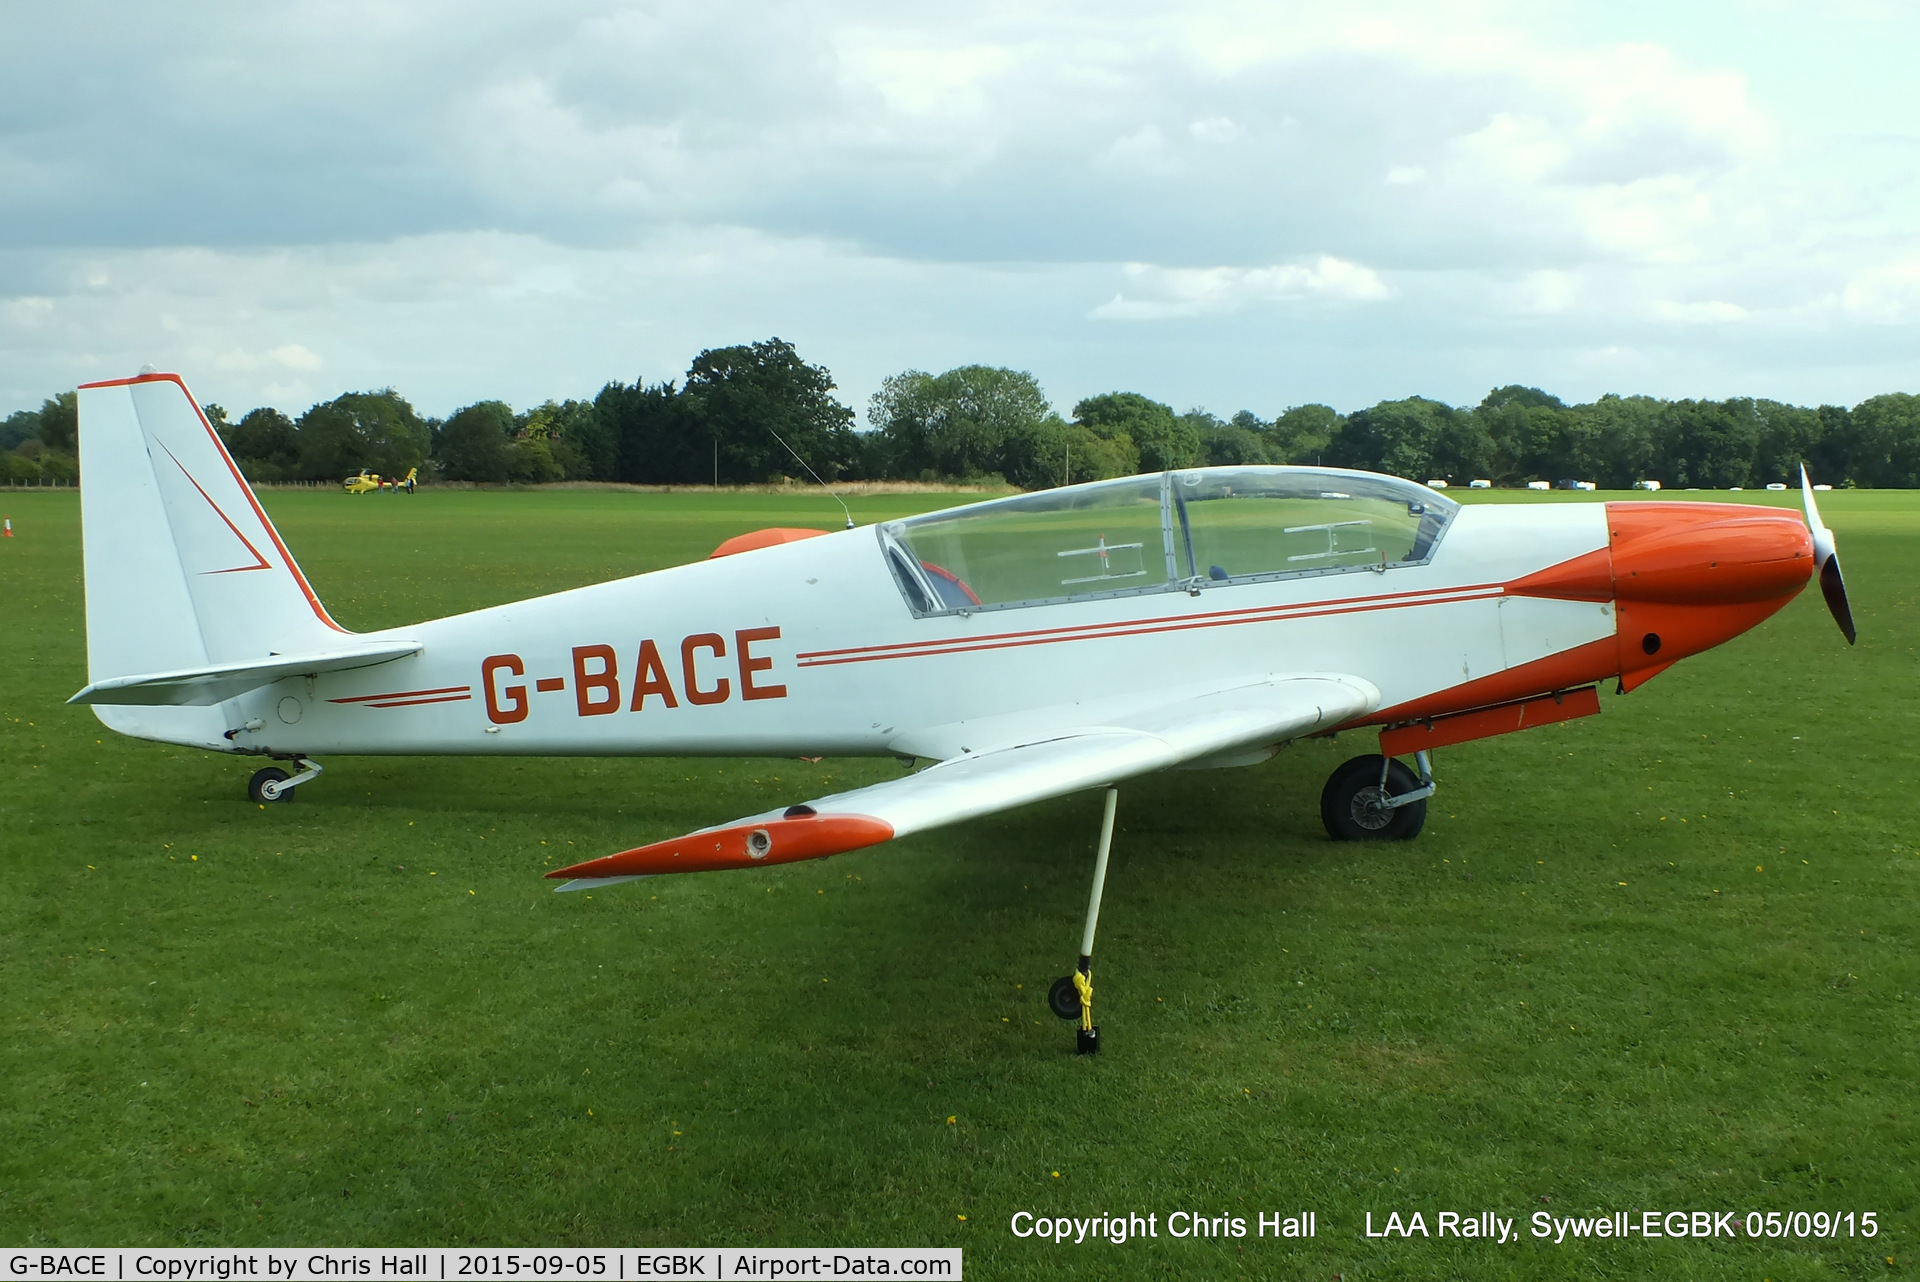 G-BACE, 1972 Sportavia-Putzer RF-5 C/N 5102, at the LAA Rally 2015, Sywell